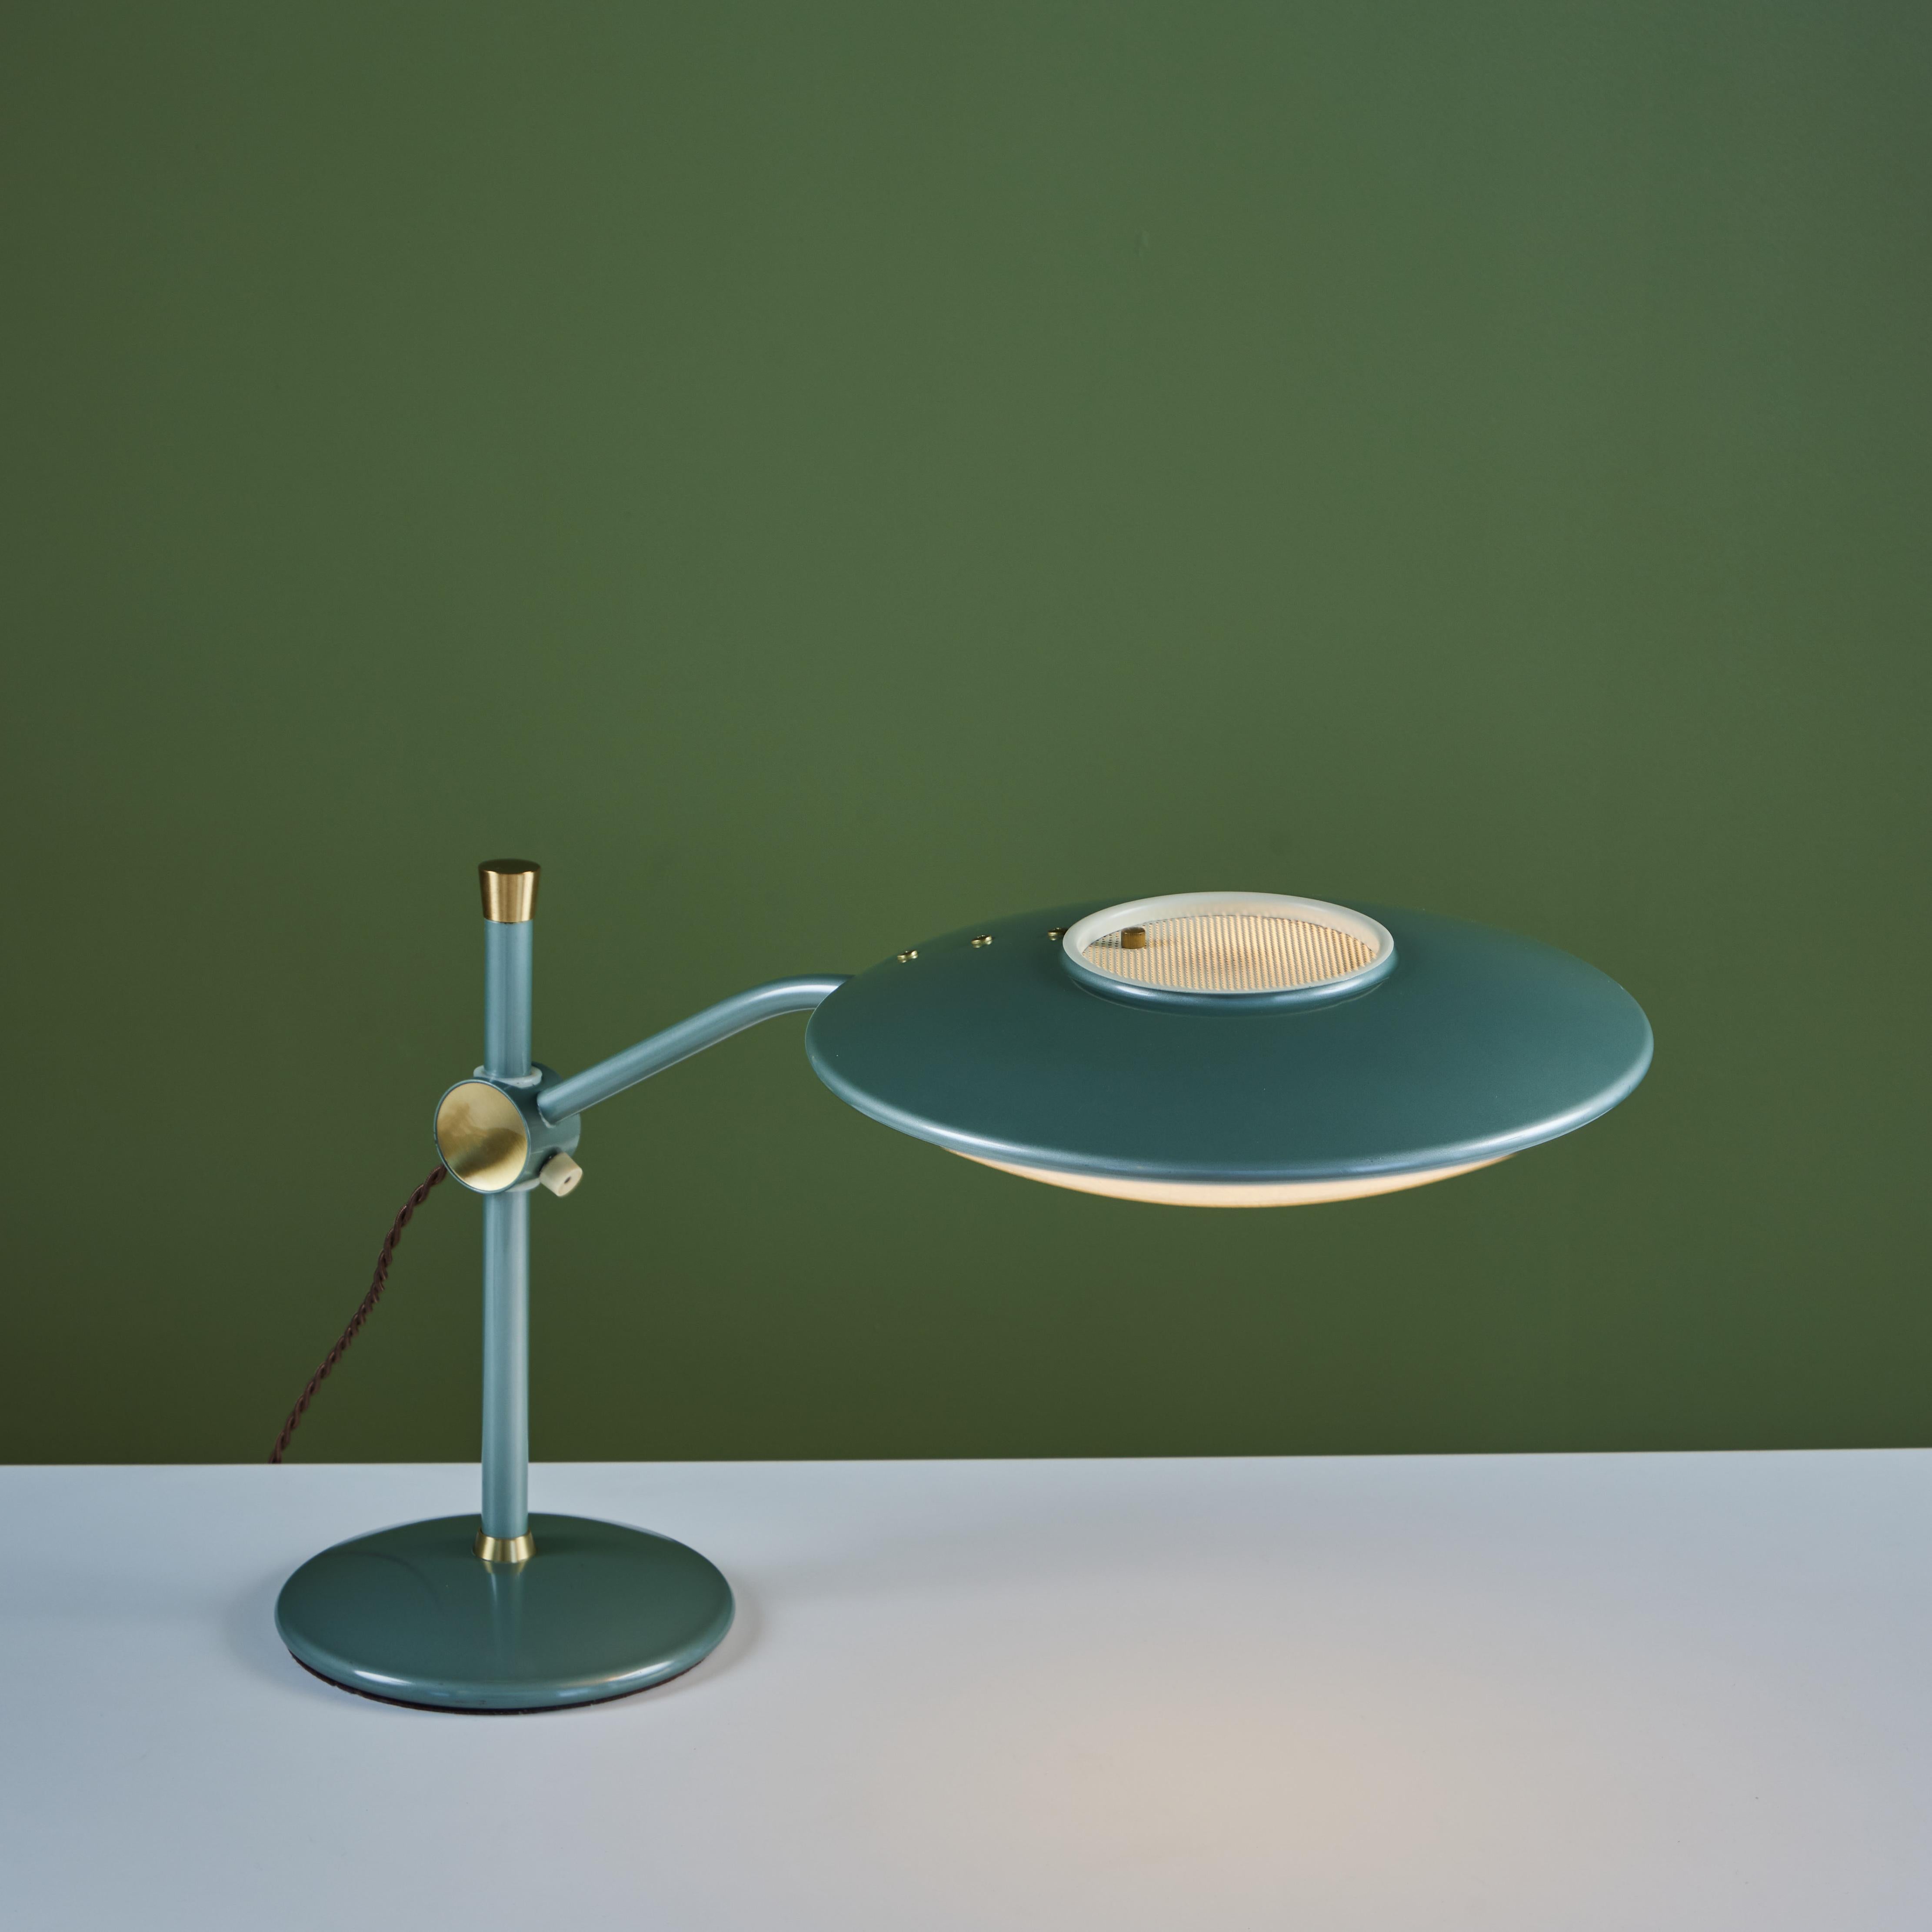 Mid-20th Century Dazor Green Enamel Desk Lamp with Brass Accents